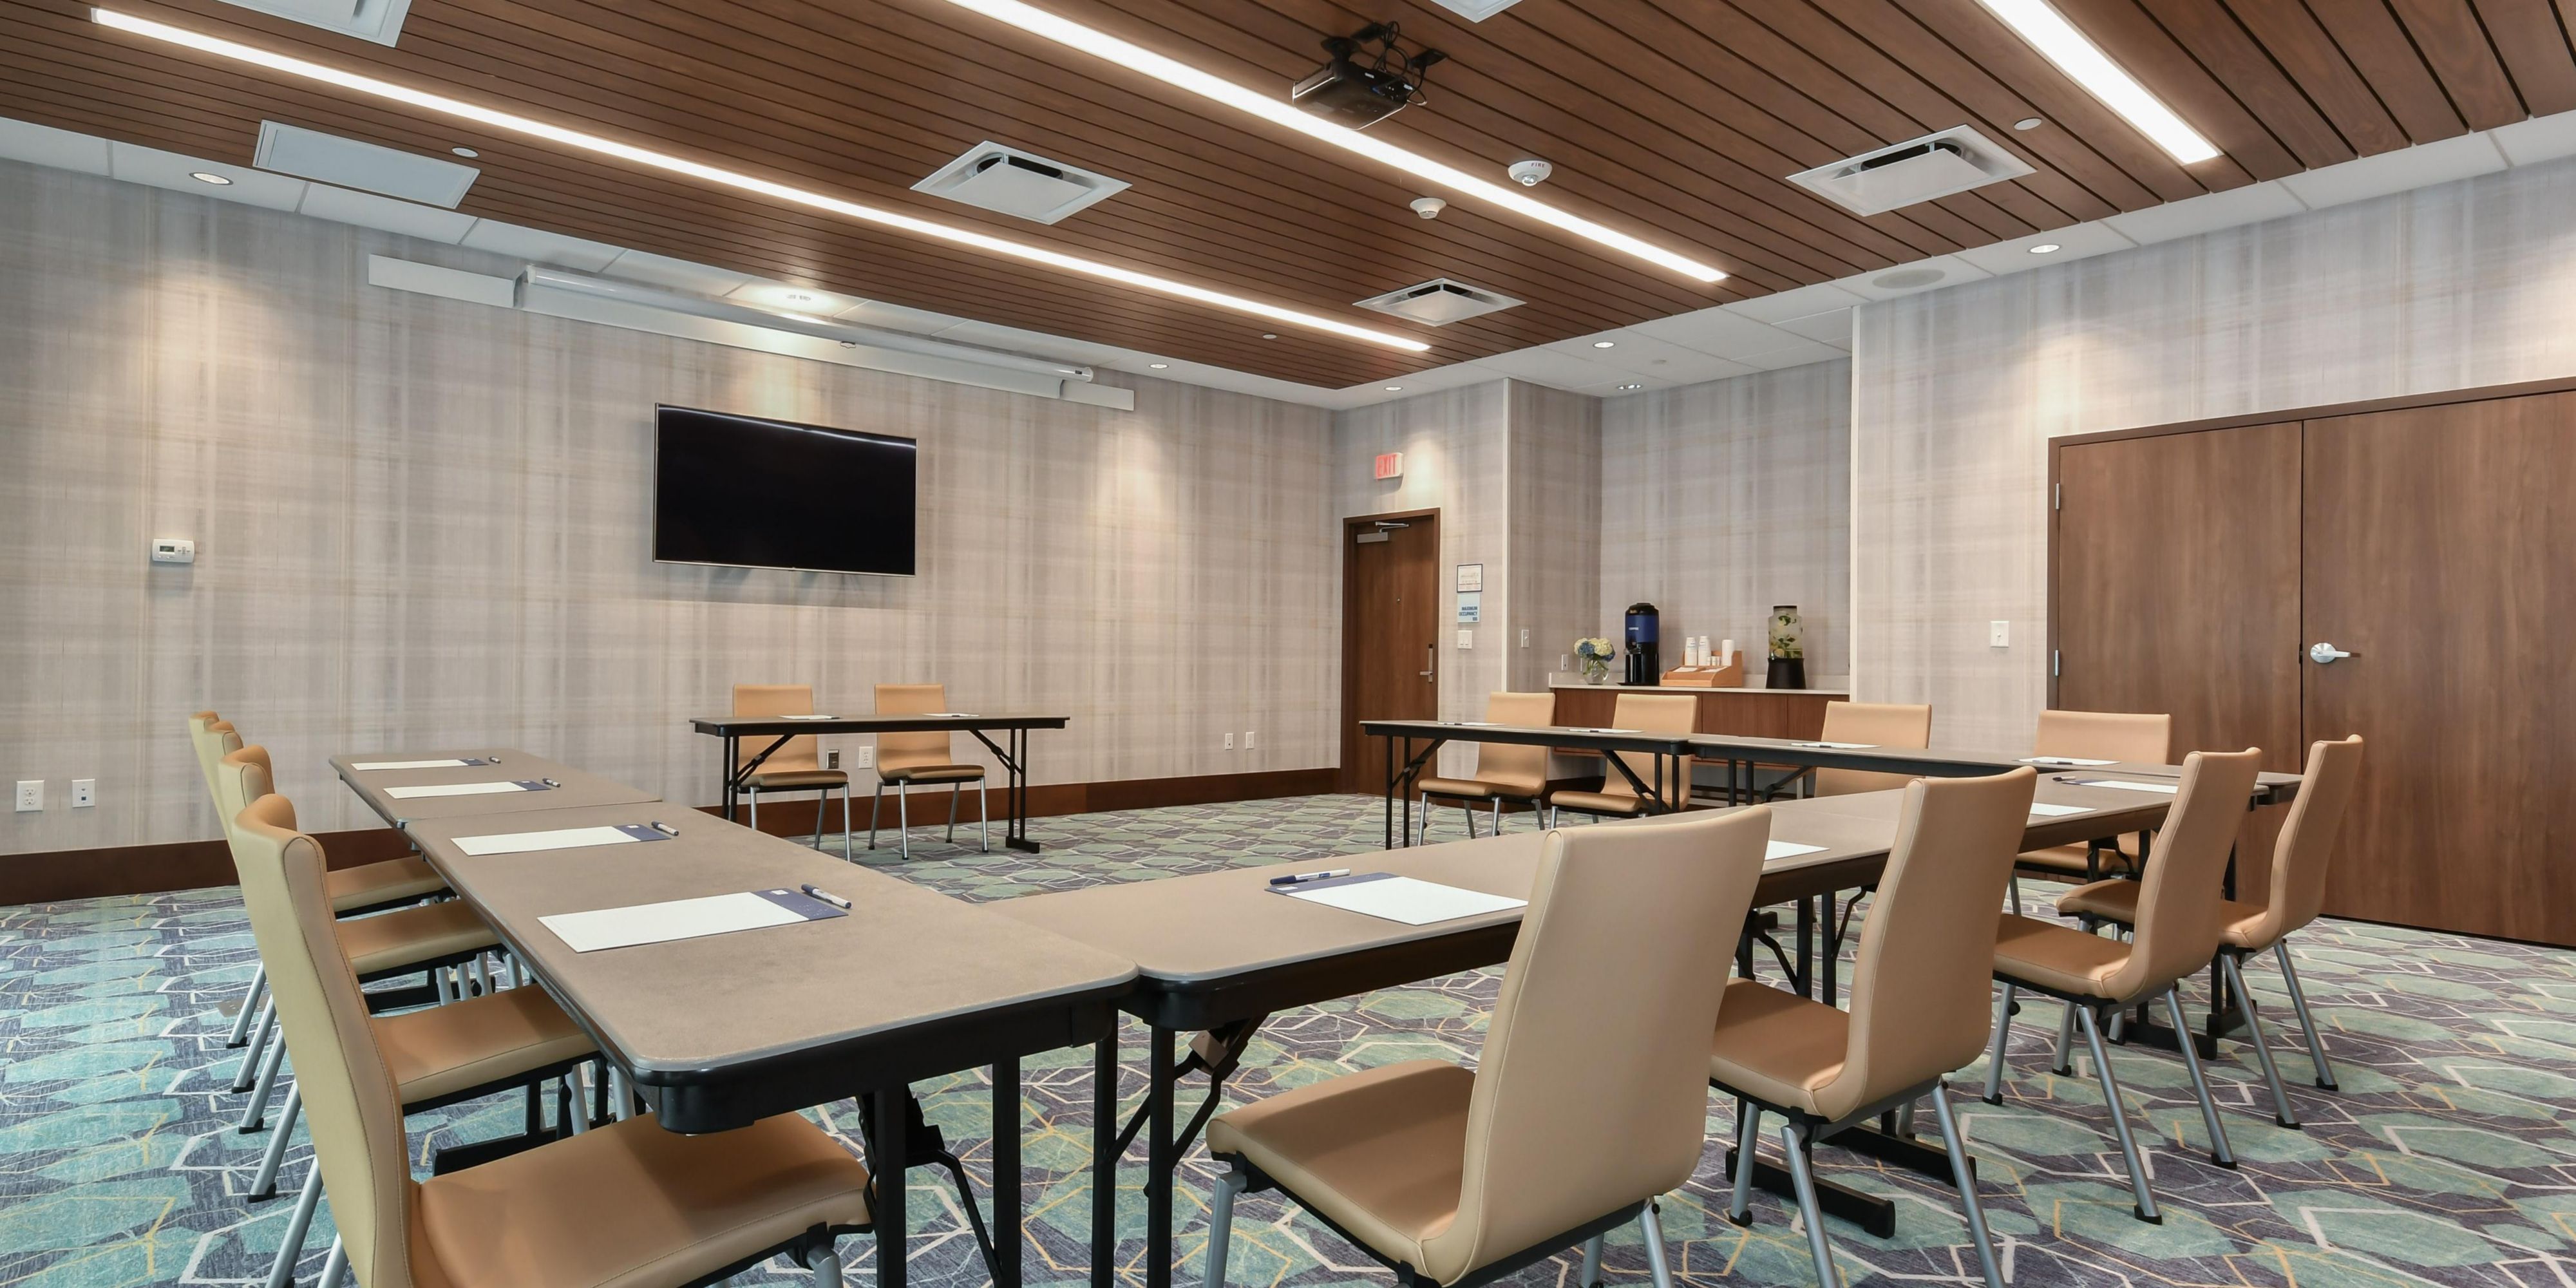 Experience our versatile 900 square feet of space for your next event. Perfect for small to medium-sized groups, we will work with you to set up all the essentials you need for your meeting including catering and A/V equipment.  

Call 704-541-9004 and ask for Cassandra.